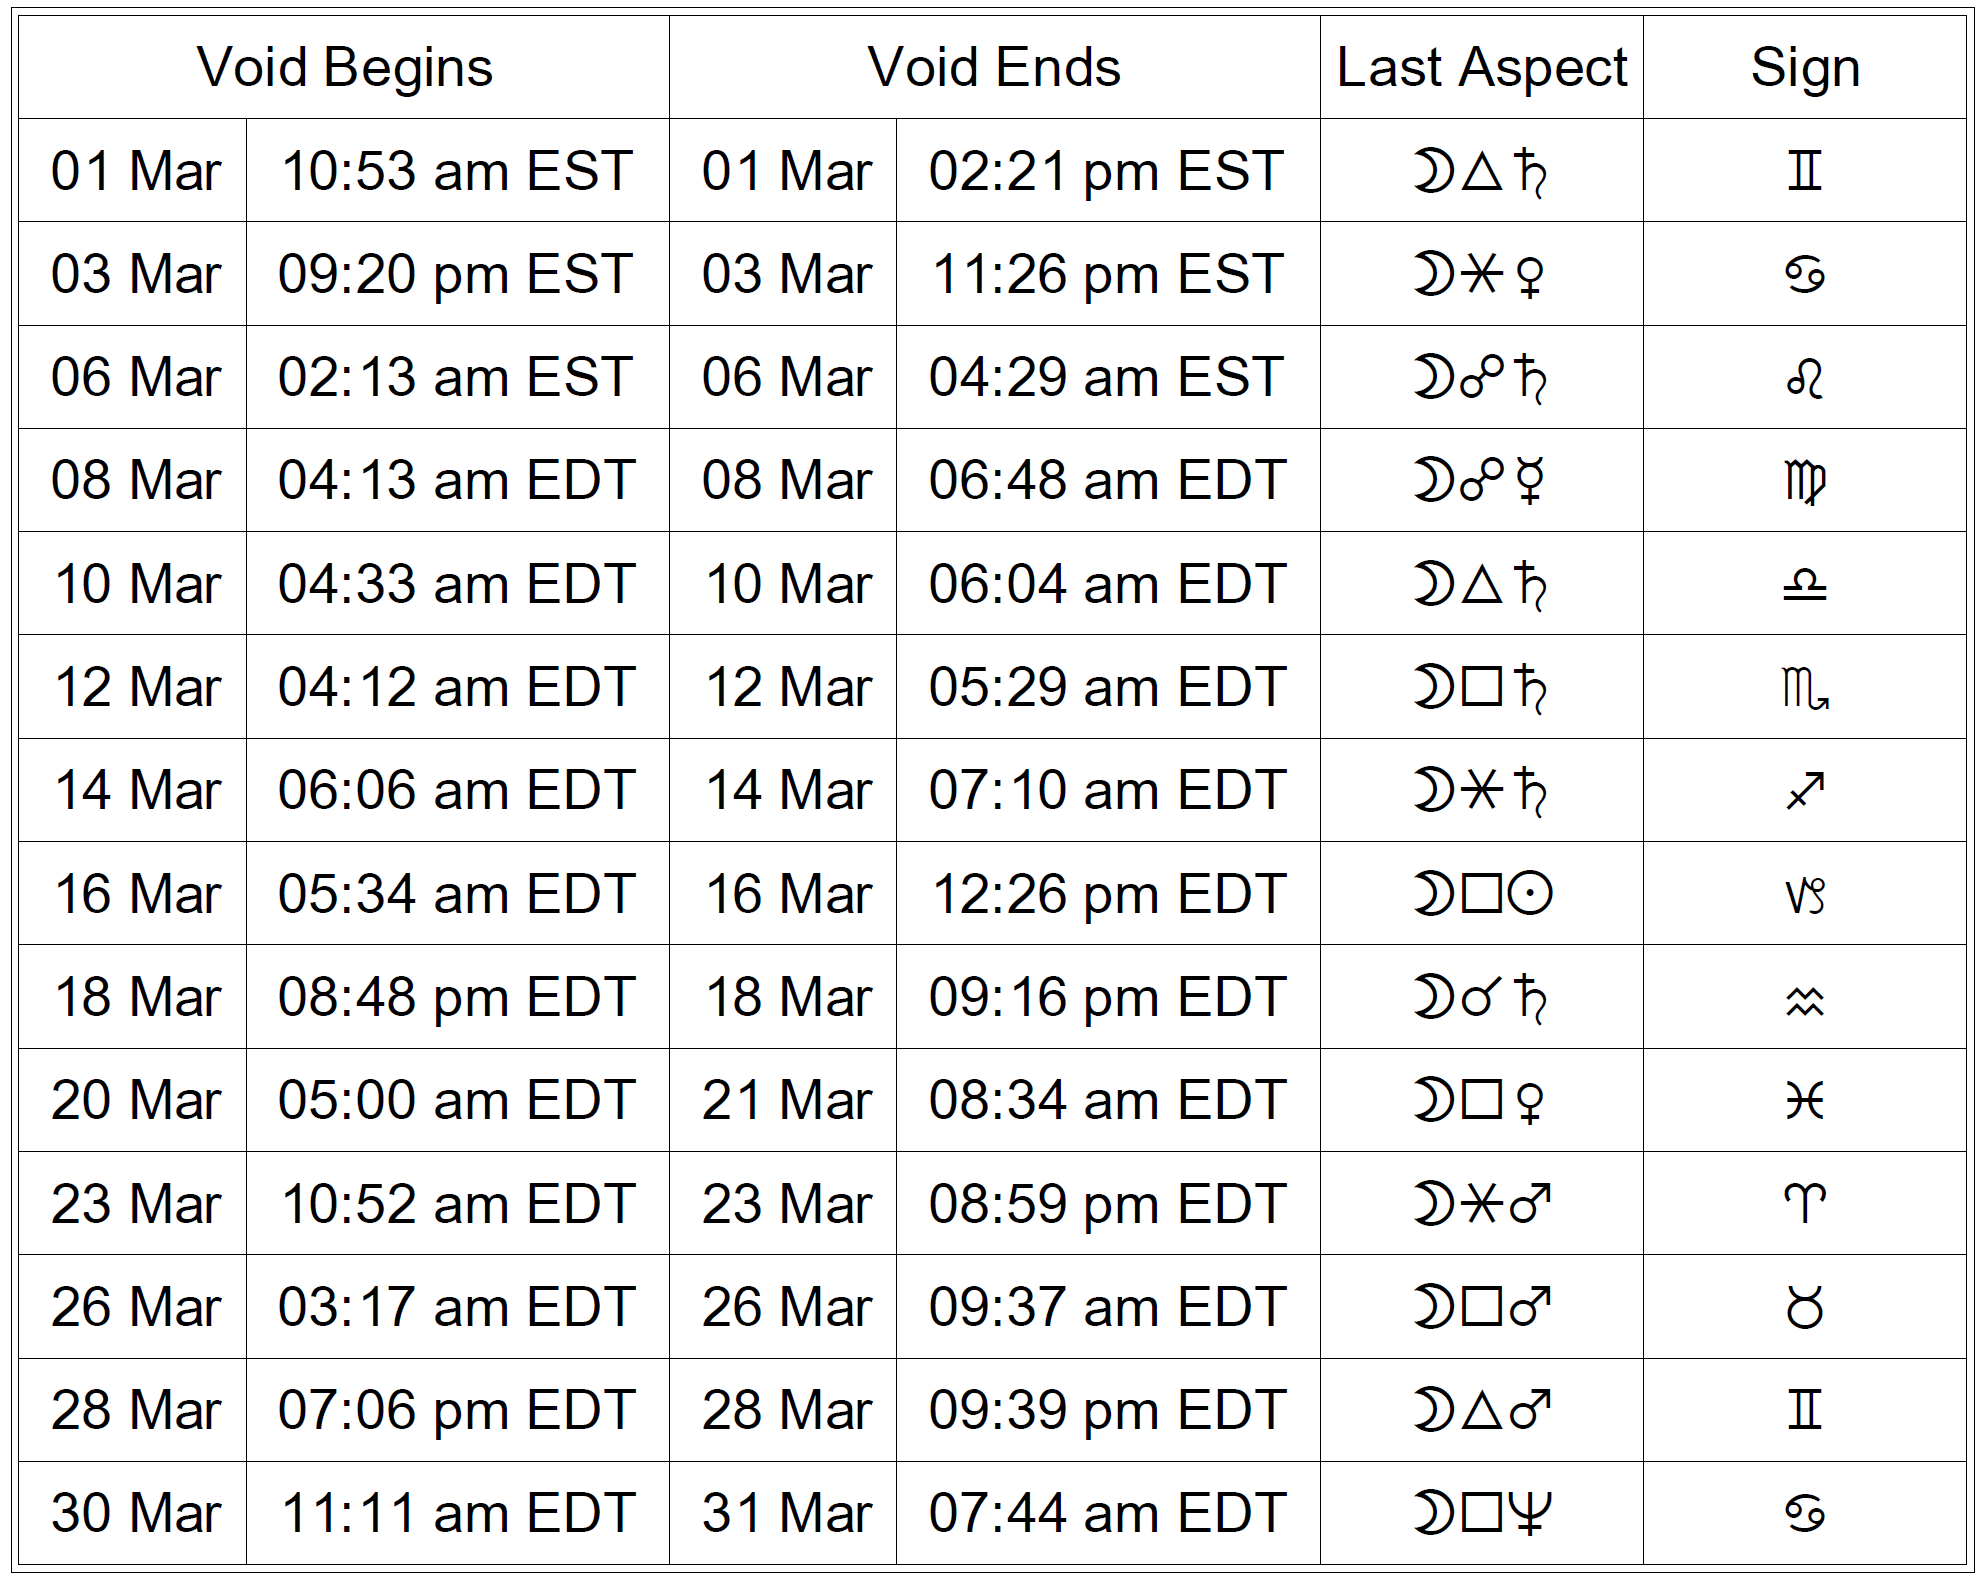 Void Moon tables for the month